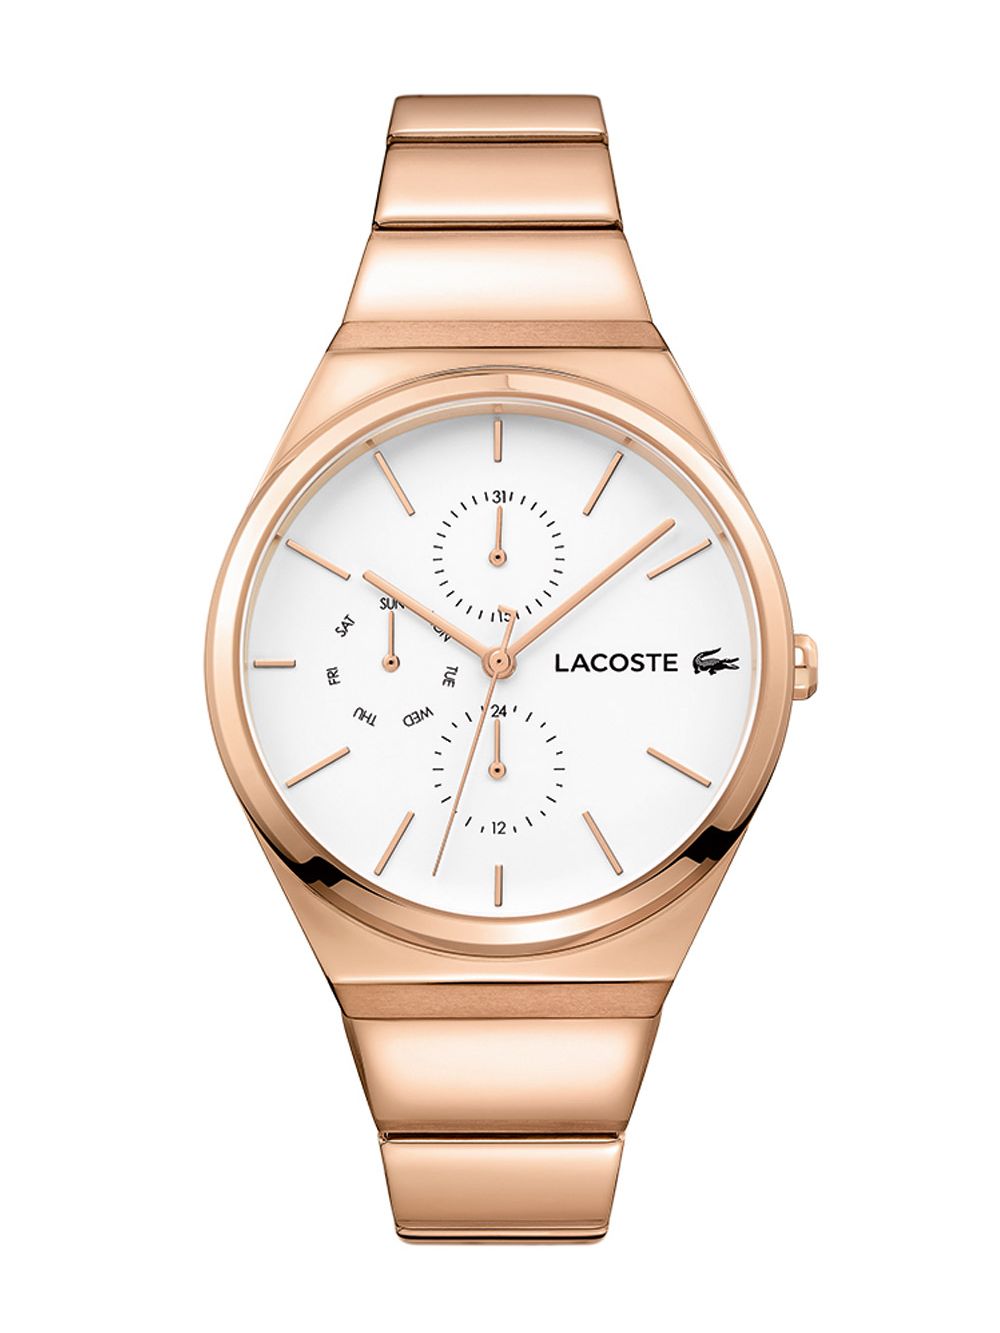 lacoste rose gold watch